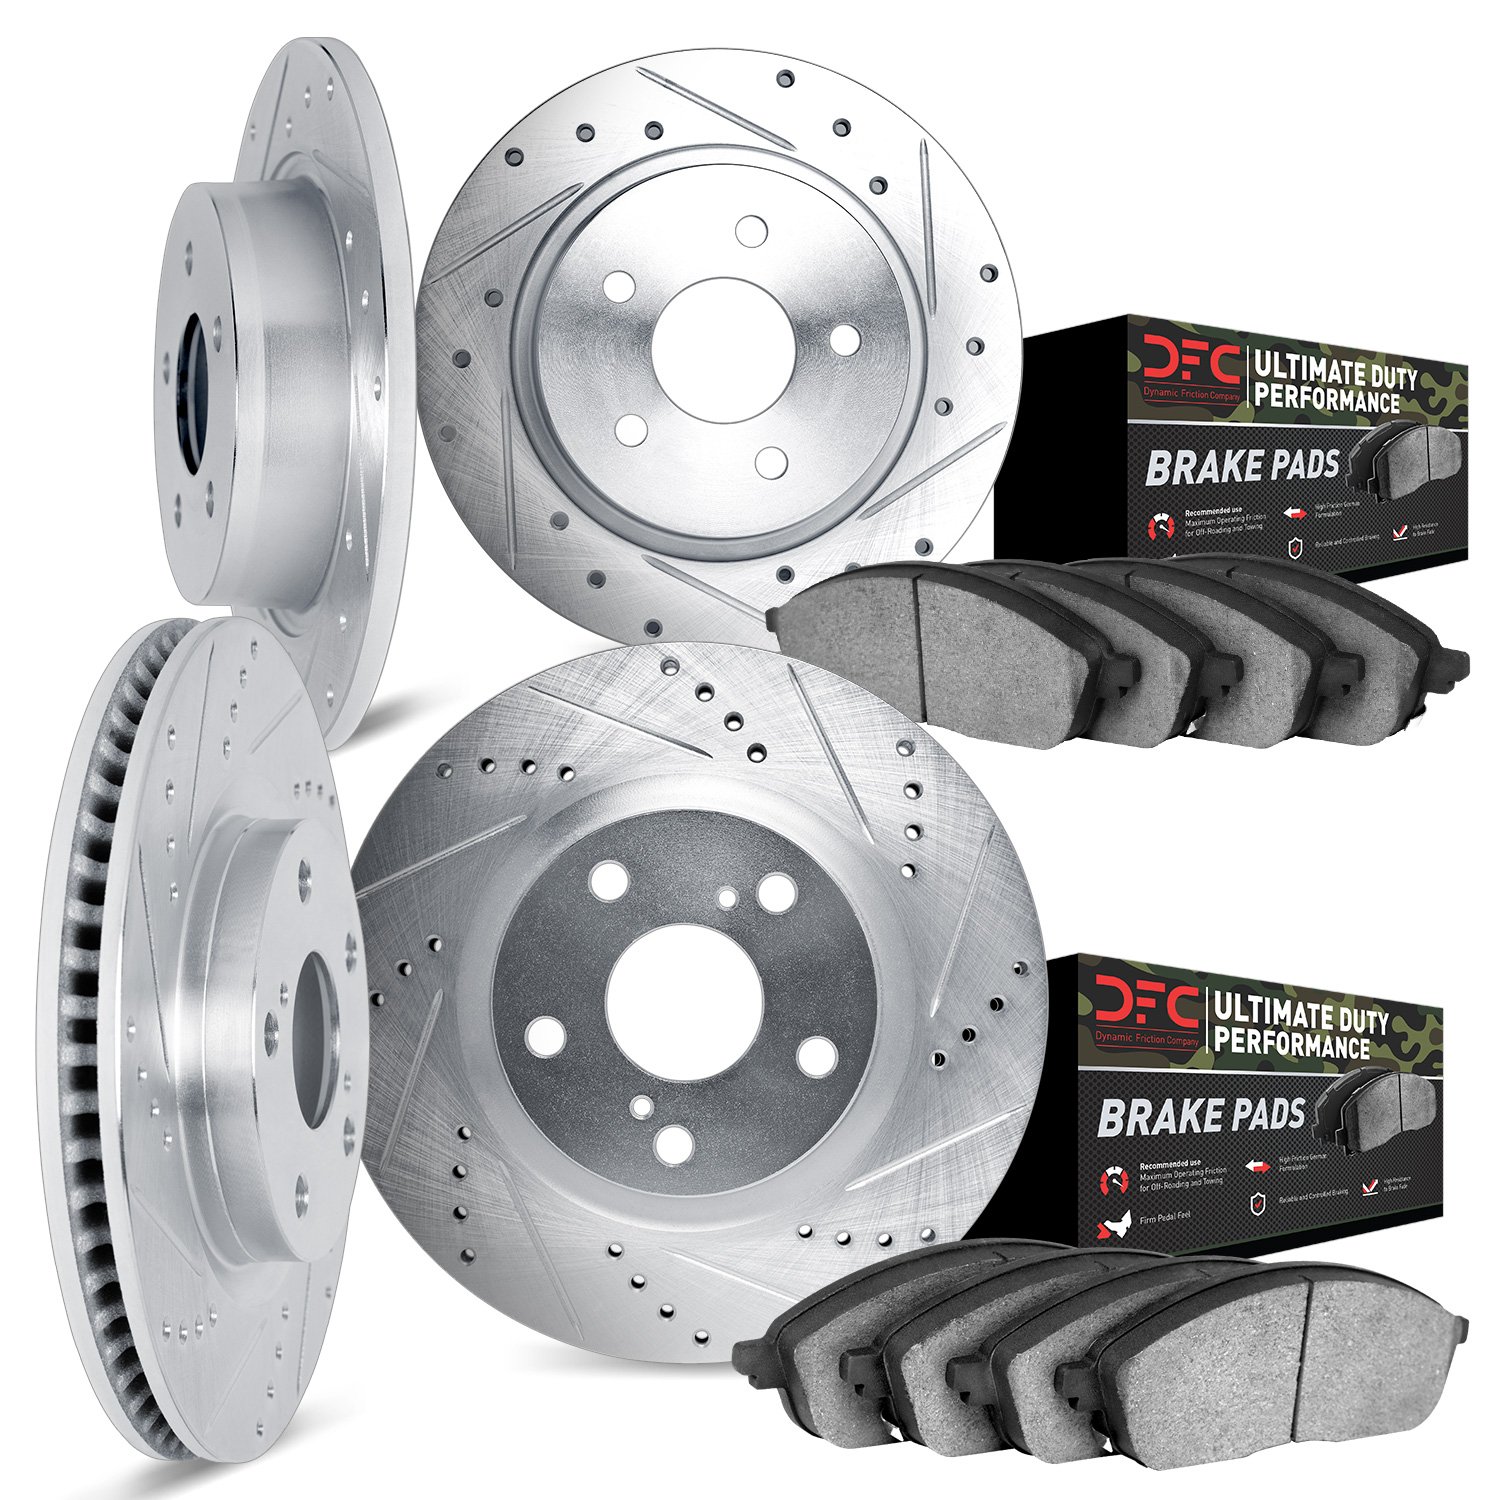 7404-42009 Drilled/Slotted Brake Rotors with Ultimate-Duty Brake Pads Kit [Silver], 2007-2012 Mopar, Position: Front and Rear